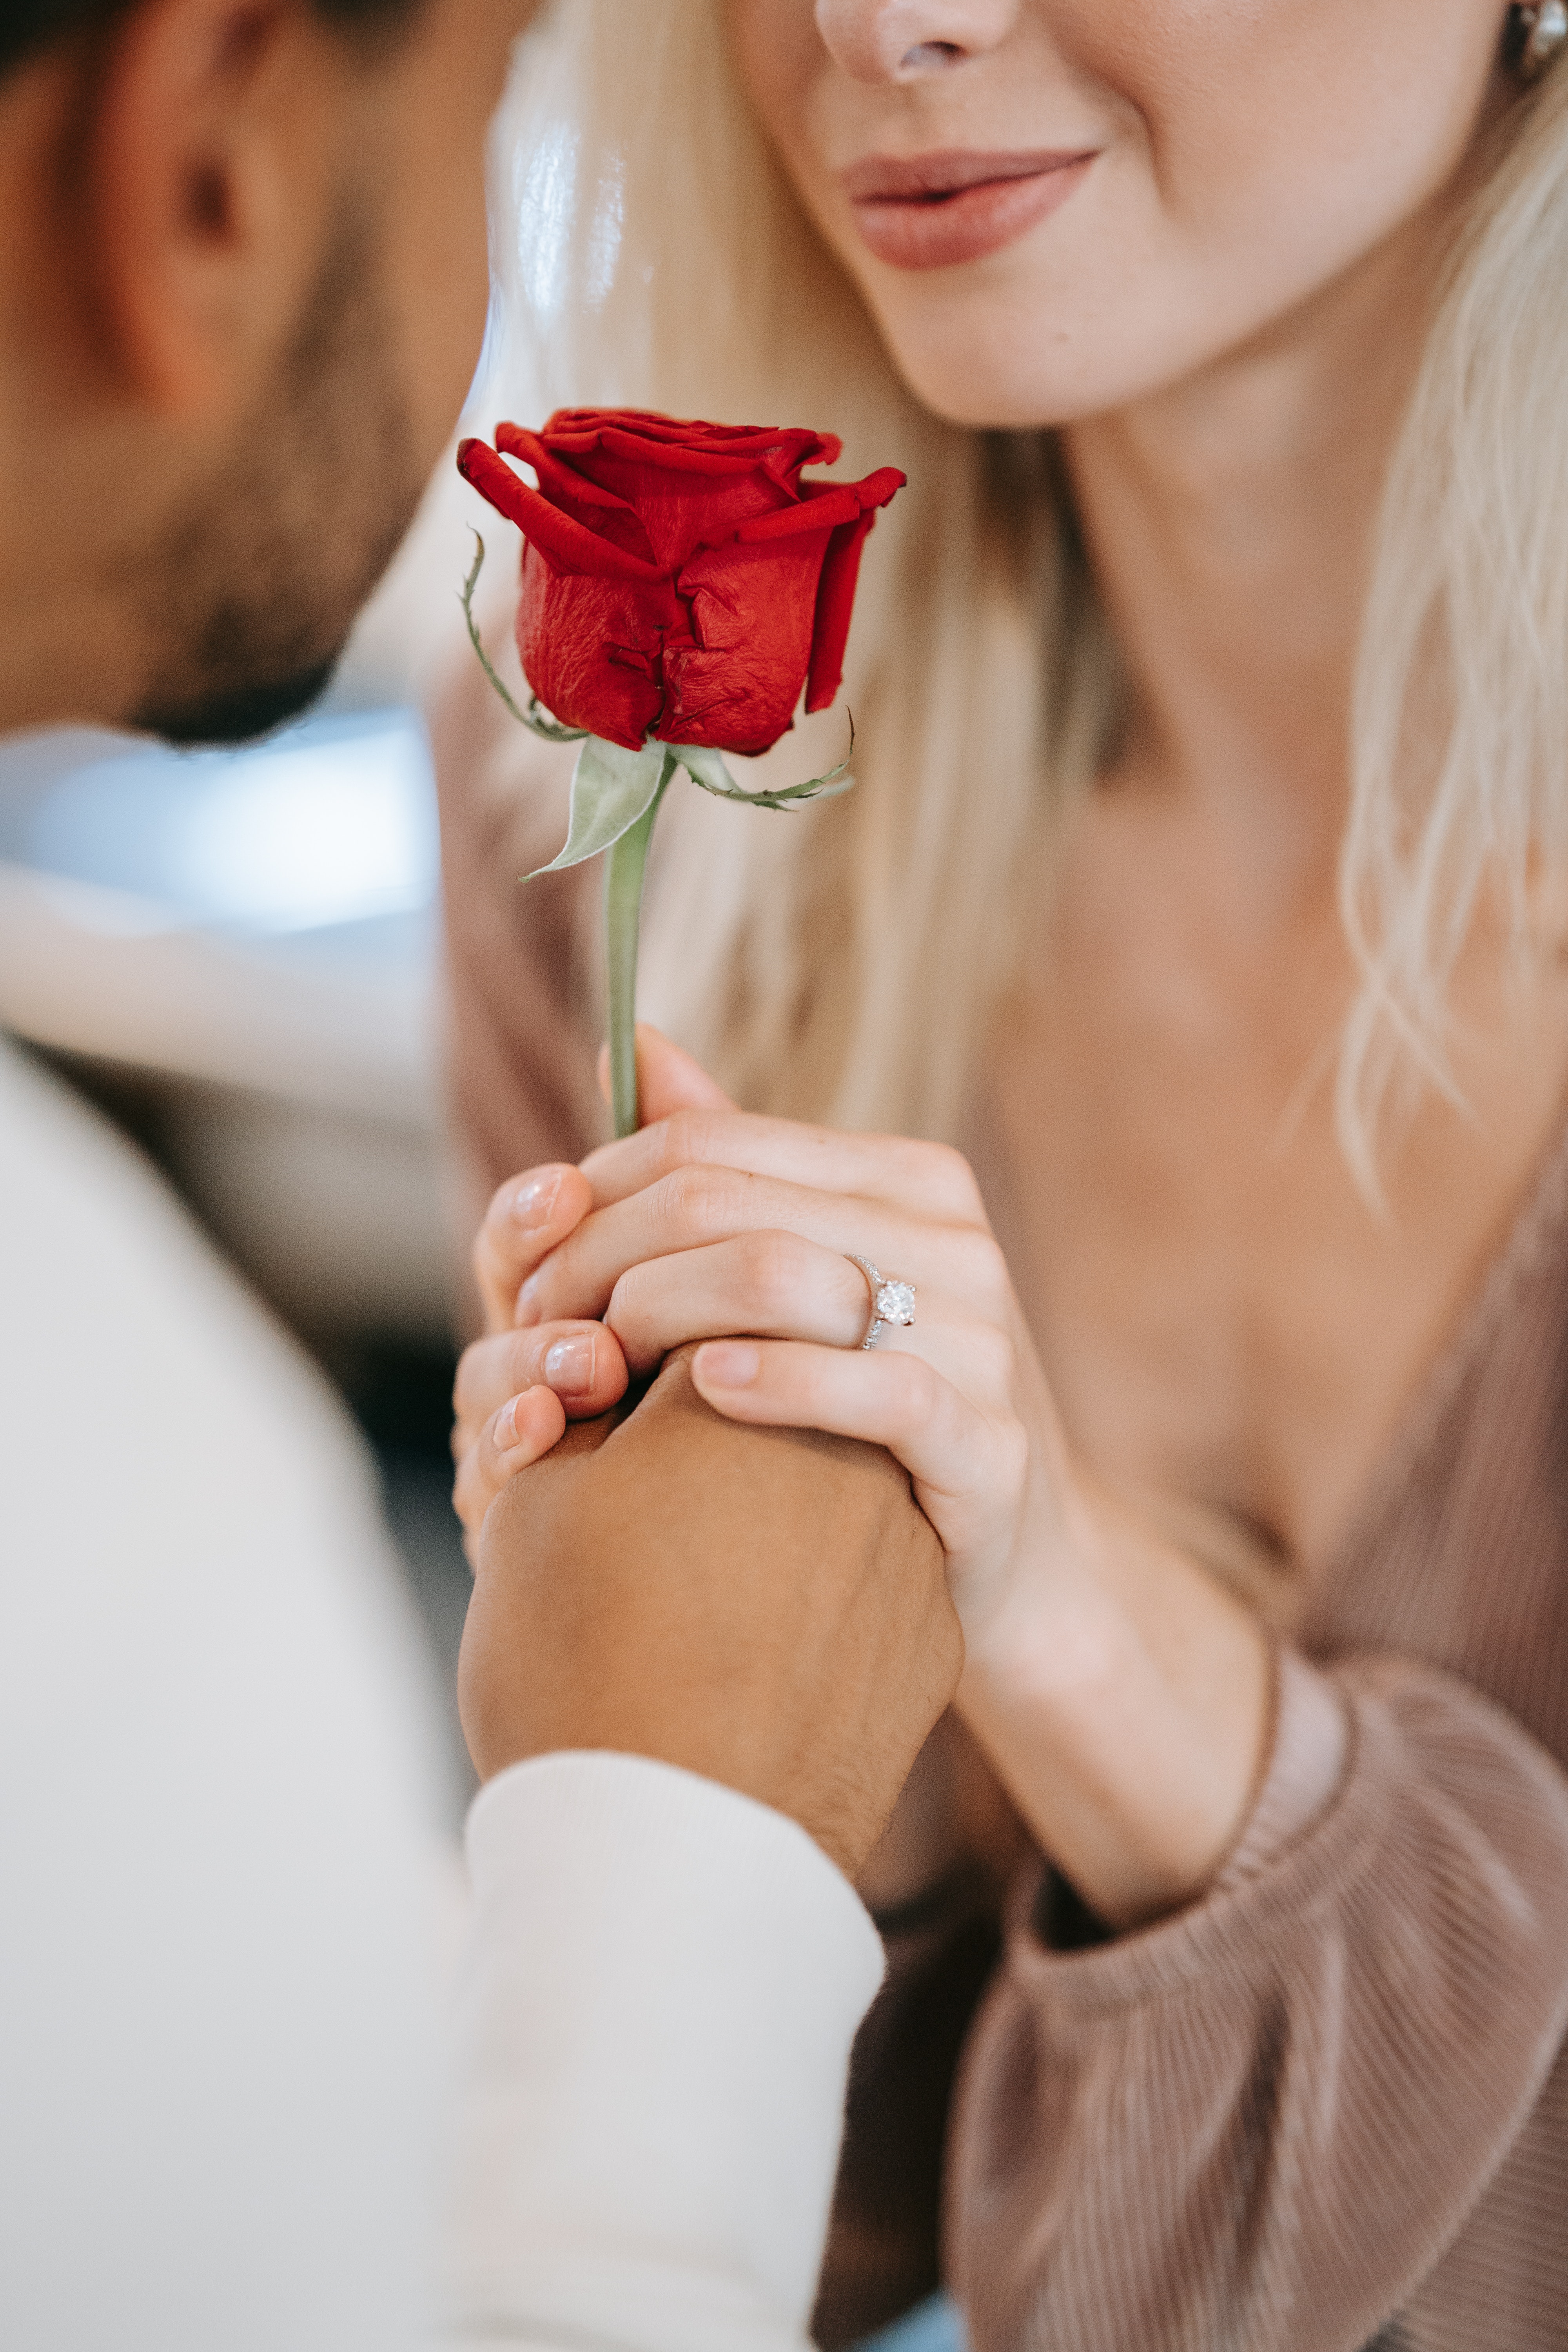 A man giving a woman a red rose. | Source: Pexels